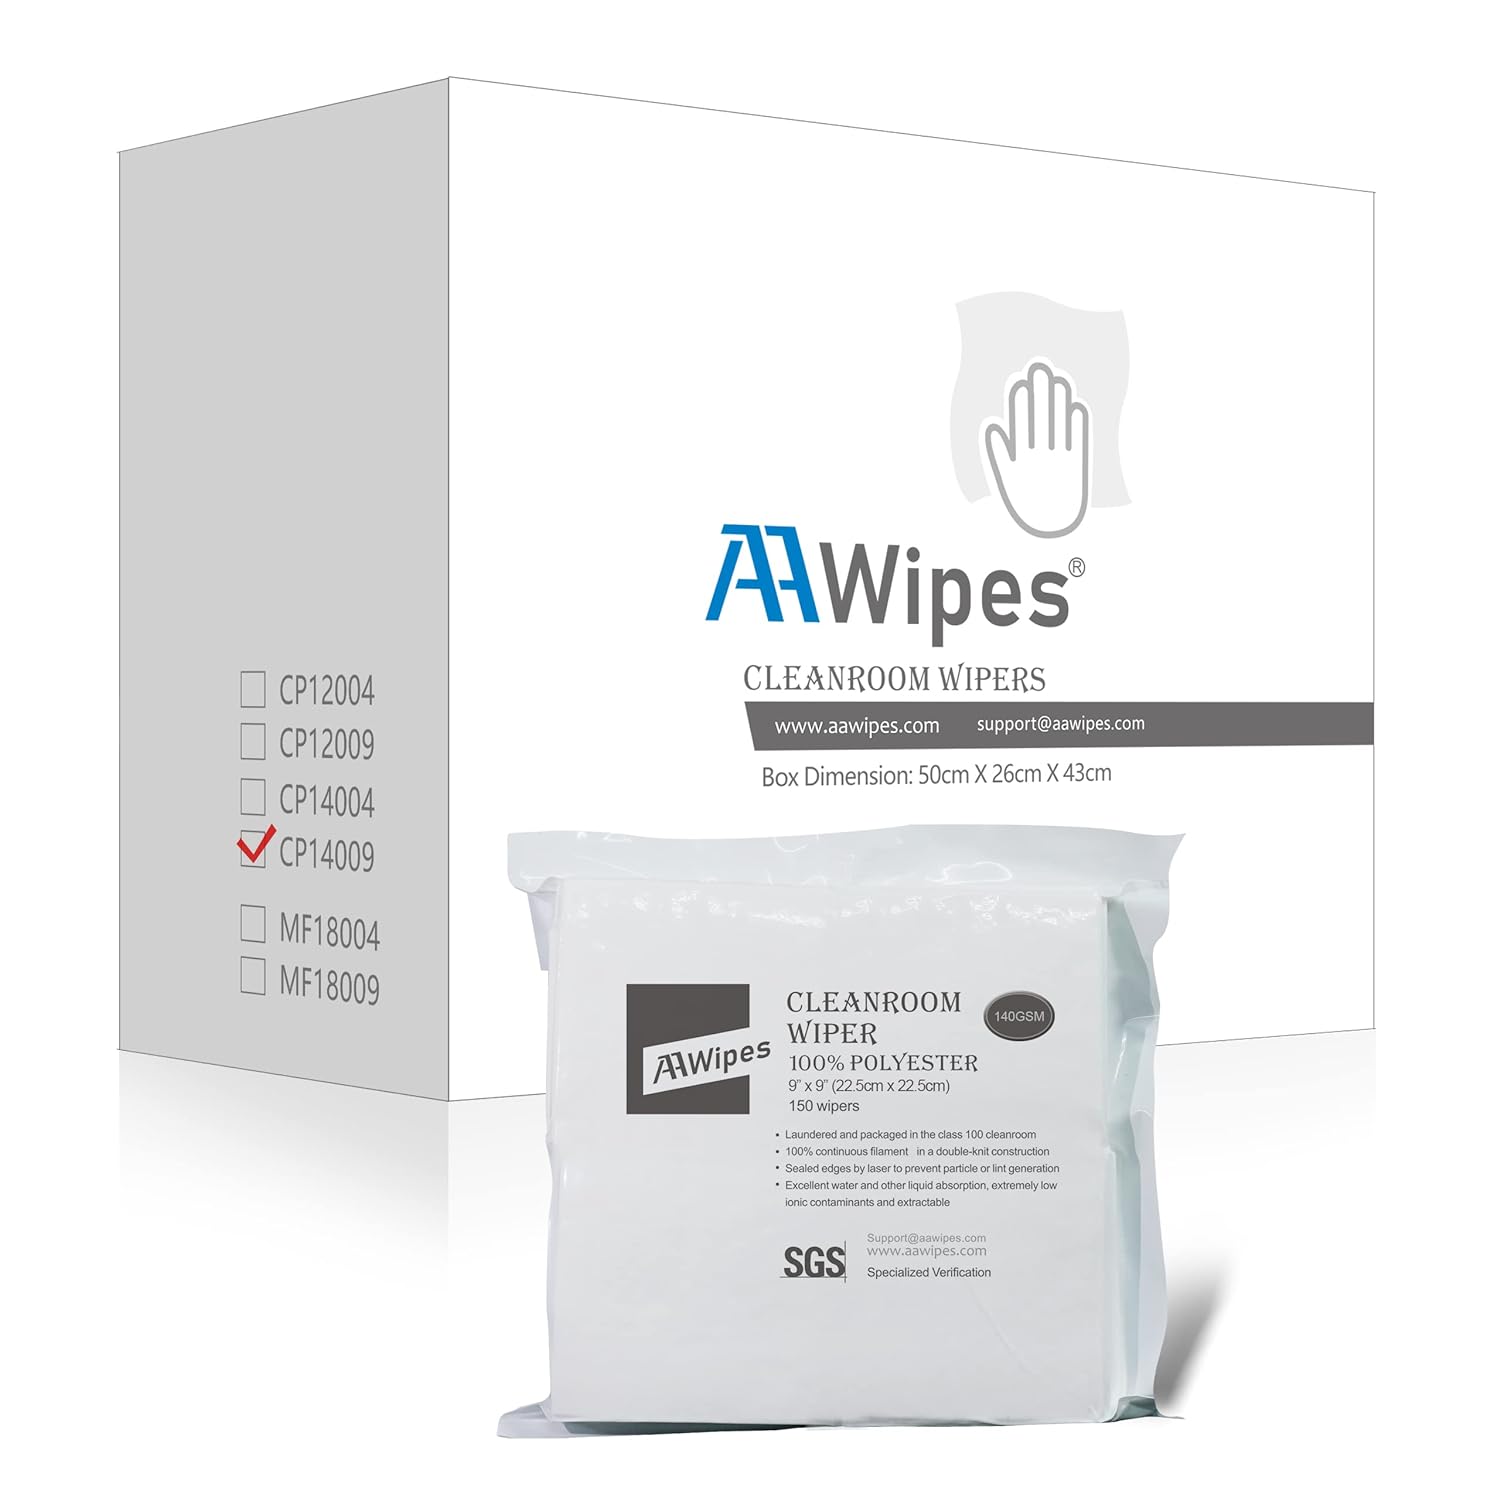 AAwipes cleanroom cloths are made from 100% high-strength polyester microfiber, laser-cut with ultrasonically sealed edges, manufactured in a class 10-100 (ISO Class 4-5) cleanroom, and laundered in ultra-pure water. They are hermetically sealed, extremely soft, non-abrasive, fast-drying, and feature a high-density weave for enhanced absorption. These cloths are lint-free and built to resist wear and tear.